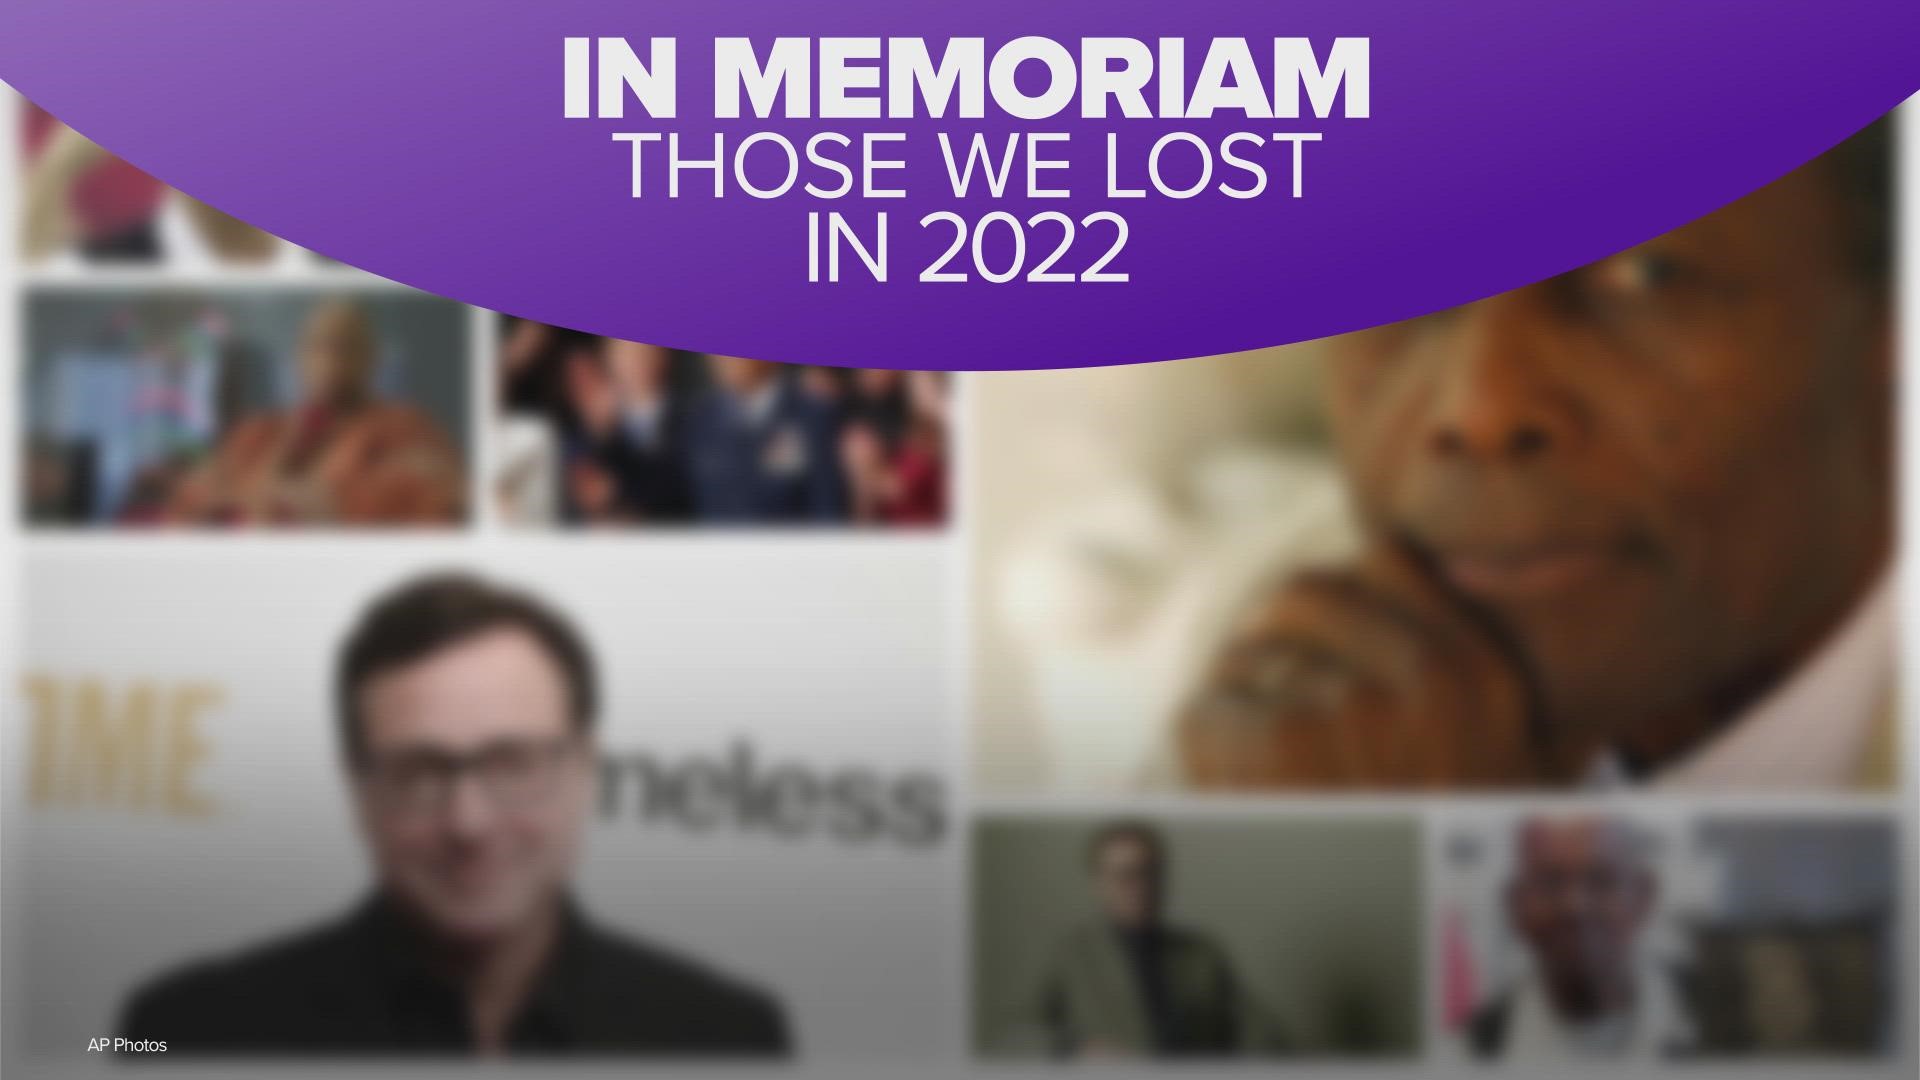 A trailbazing actor, a beloved TV dad, a rock and roll giant and two centenarians who fought in World War II are some of the legends we lost in 2022.